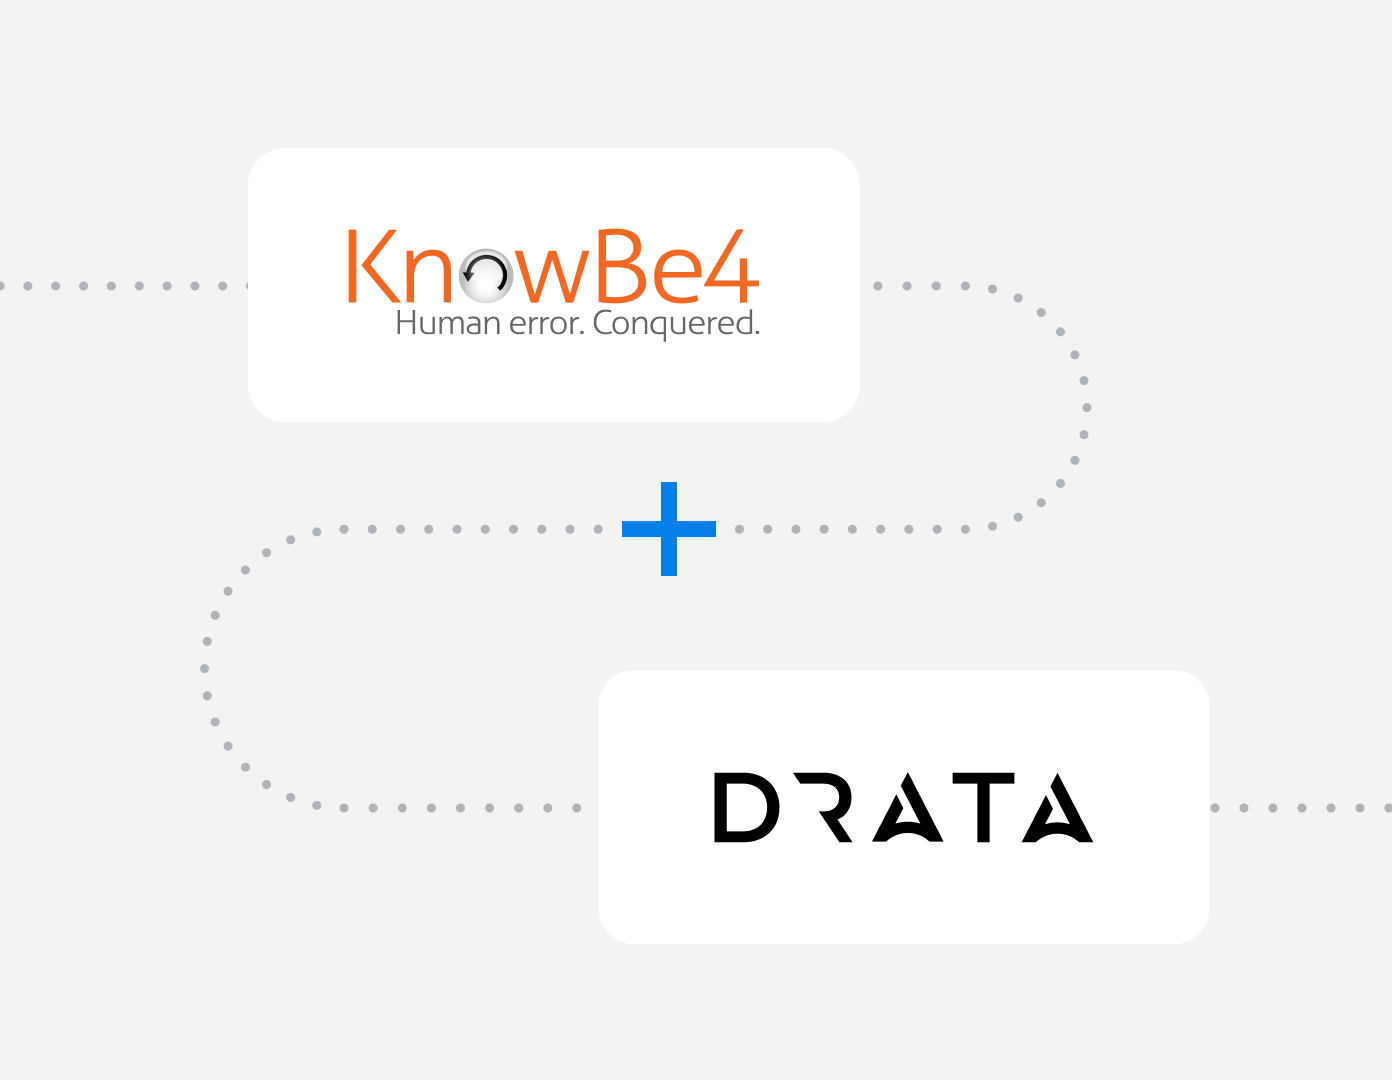 Knowbe4 and Drata